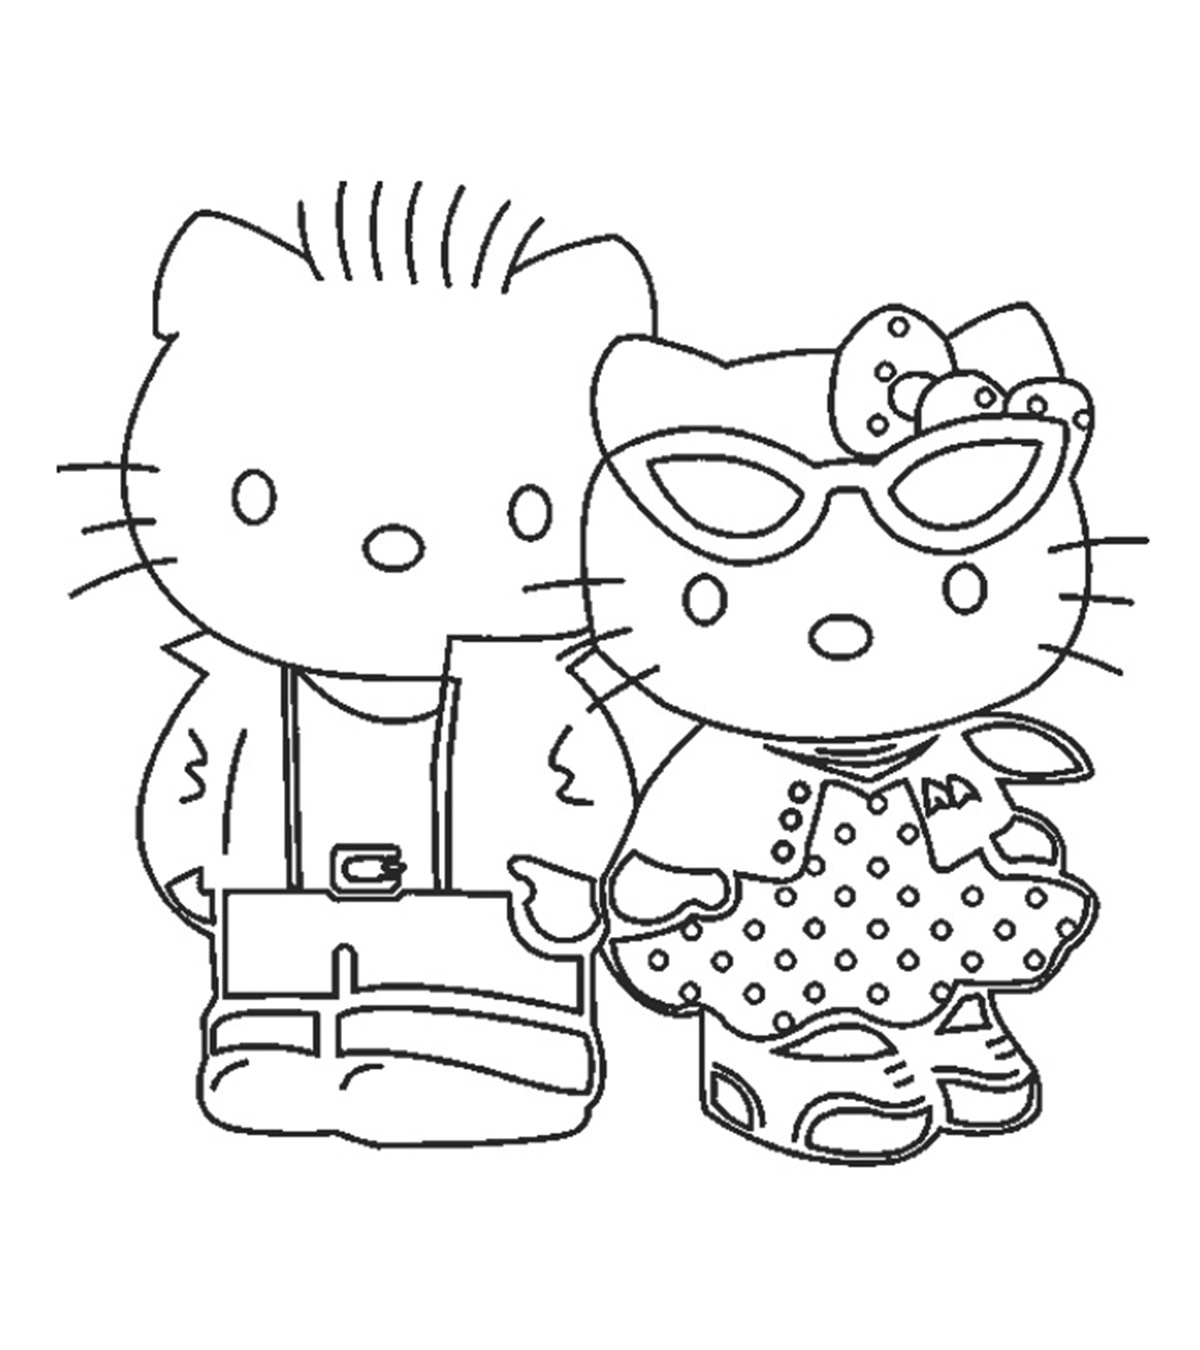 Happy Birthday Coloring Pages For Friends Top 75 Free Printable Hello Kitty Coloring Pages Online